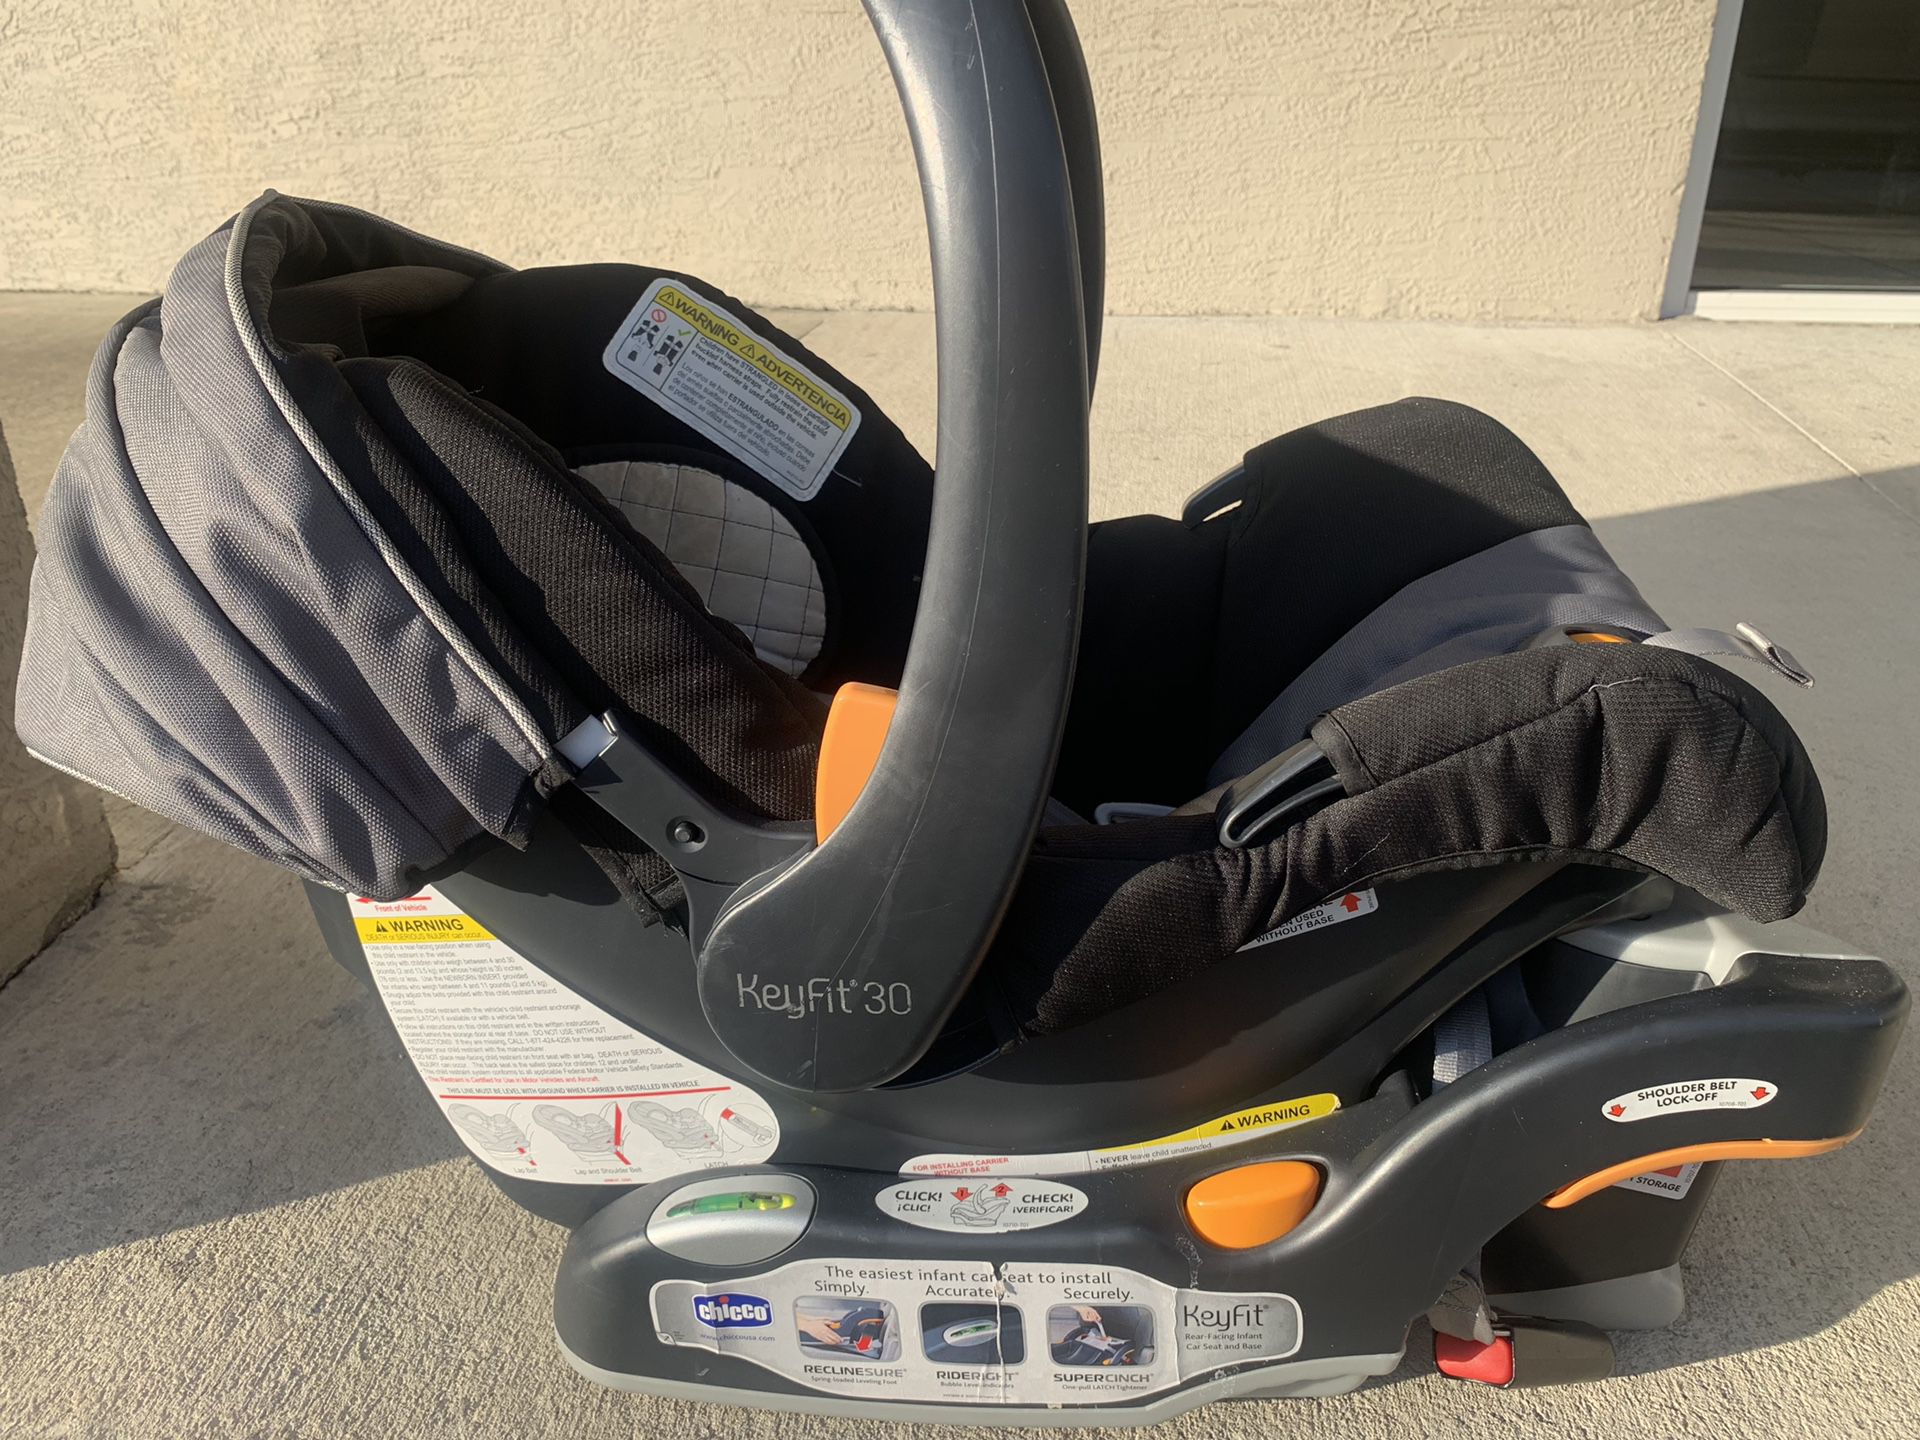 Baby car seat like new